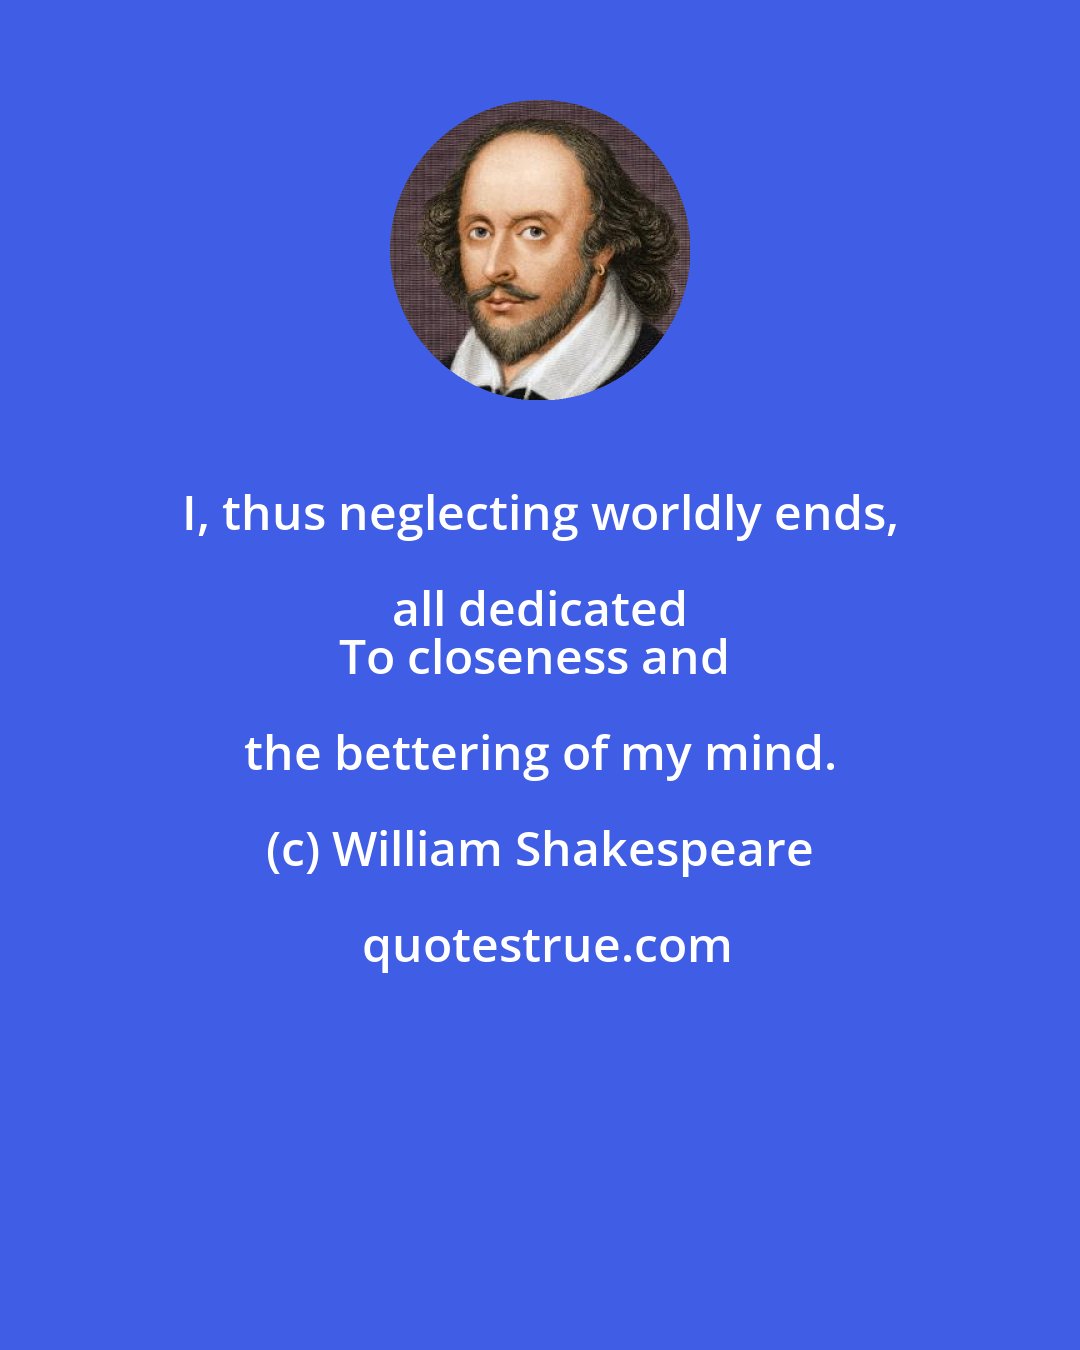 William Shakespeare: I, thus neglecting worldly ends, all dedicated 
To closeness and the bettering of my mind.